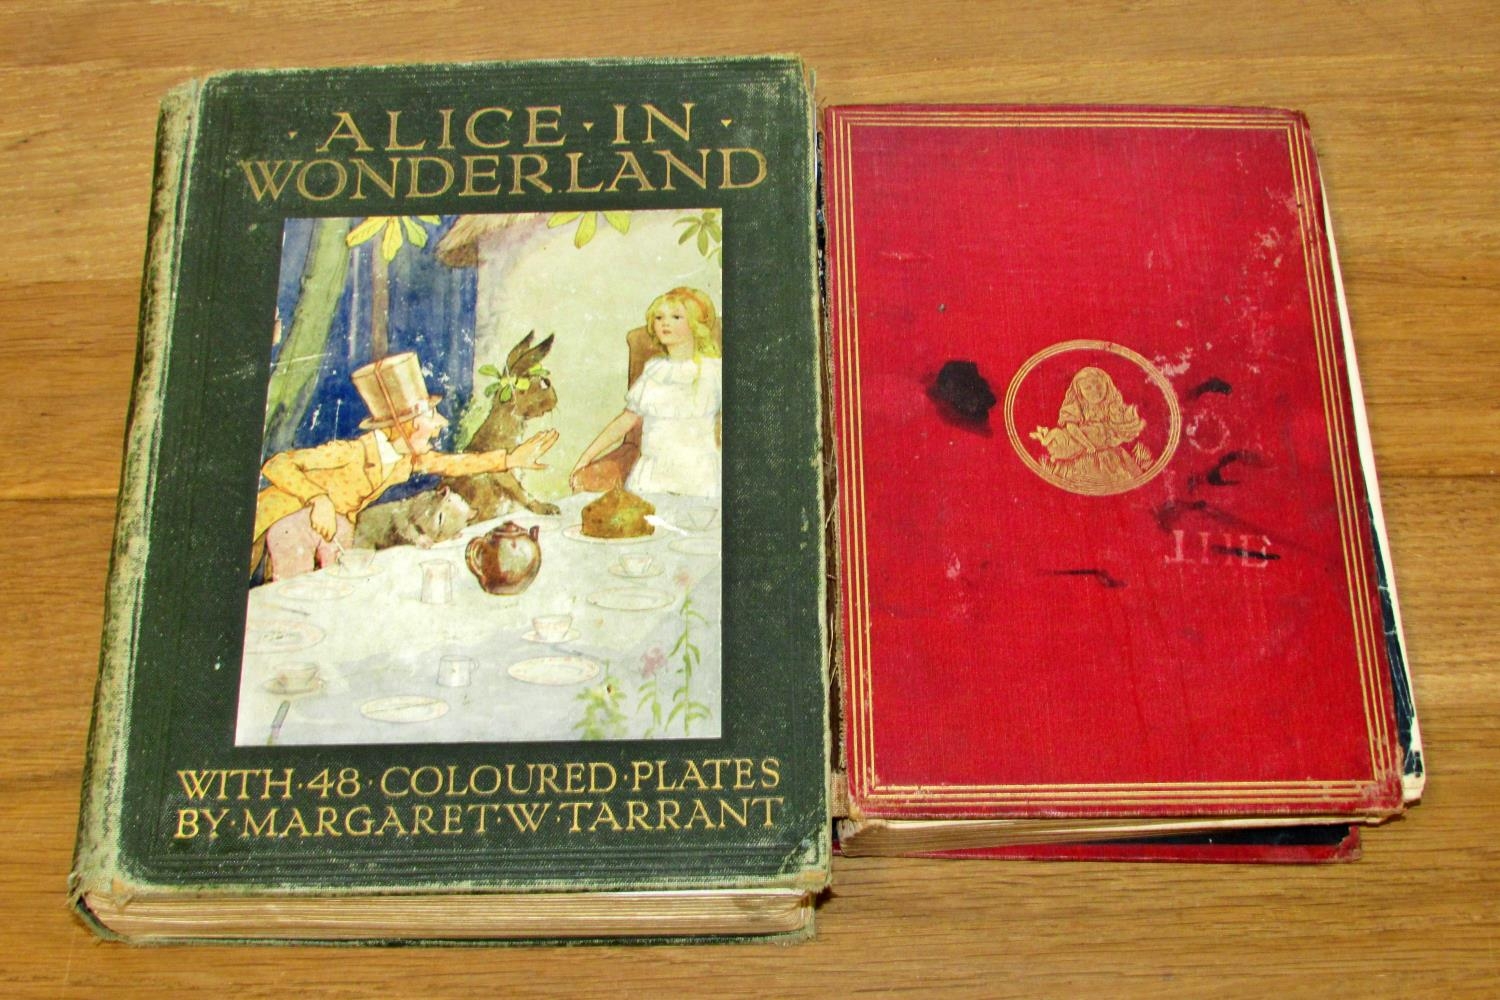 Two editions of Lewis Carroll's Alice's Adventures in Wonderland - the first (rare) 1881,